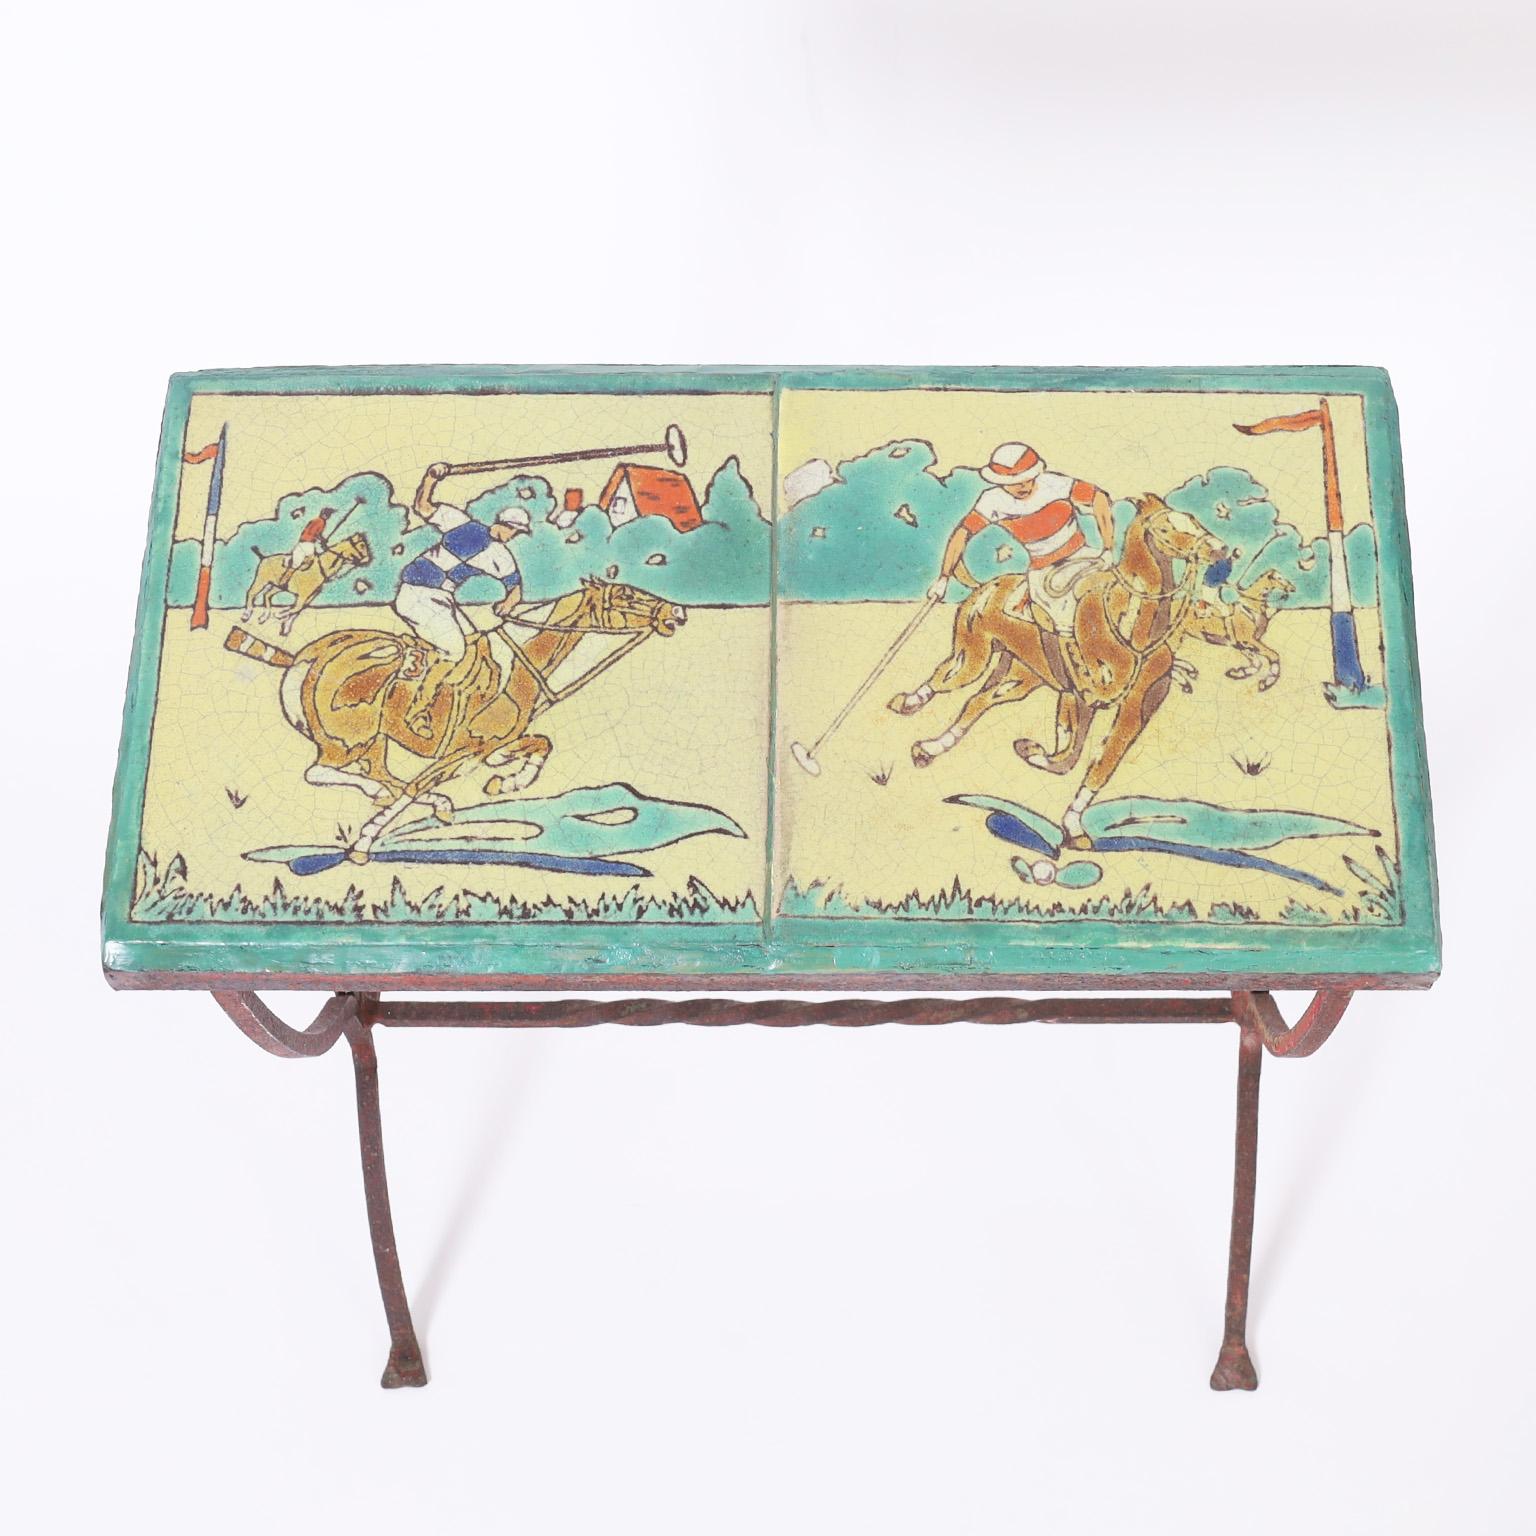 Hand-Crafted Antique Iron Table or Stand with a Polo Themed Tile Top For Sale